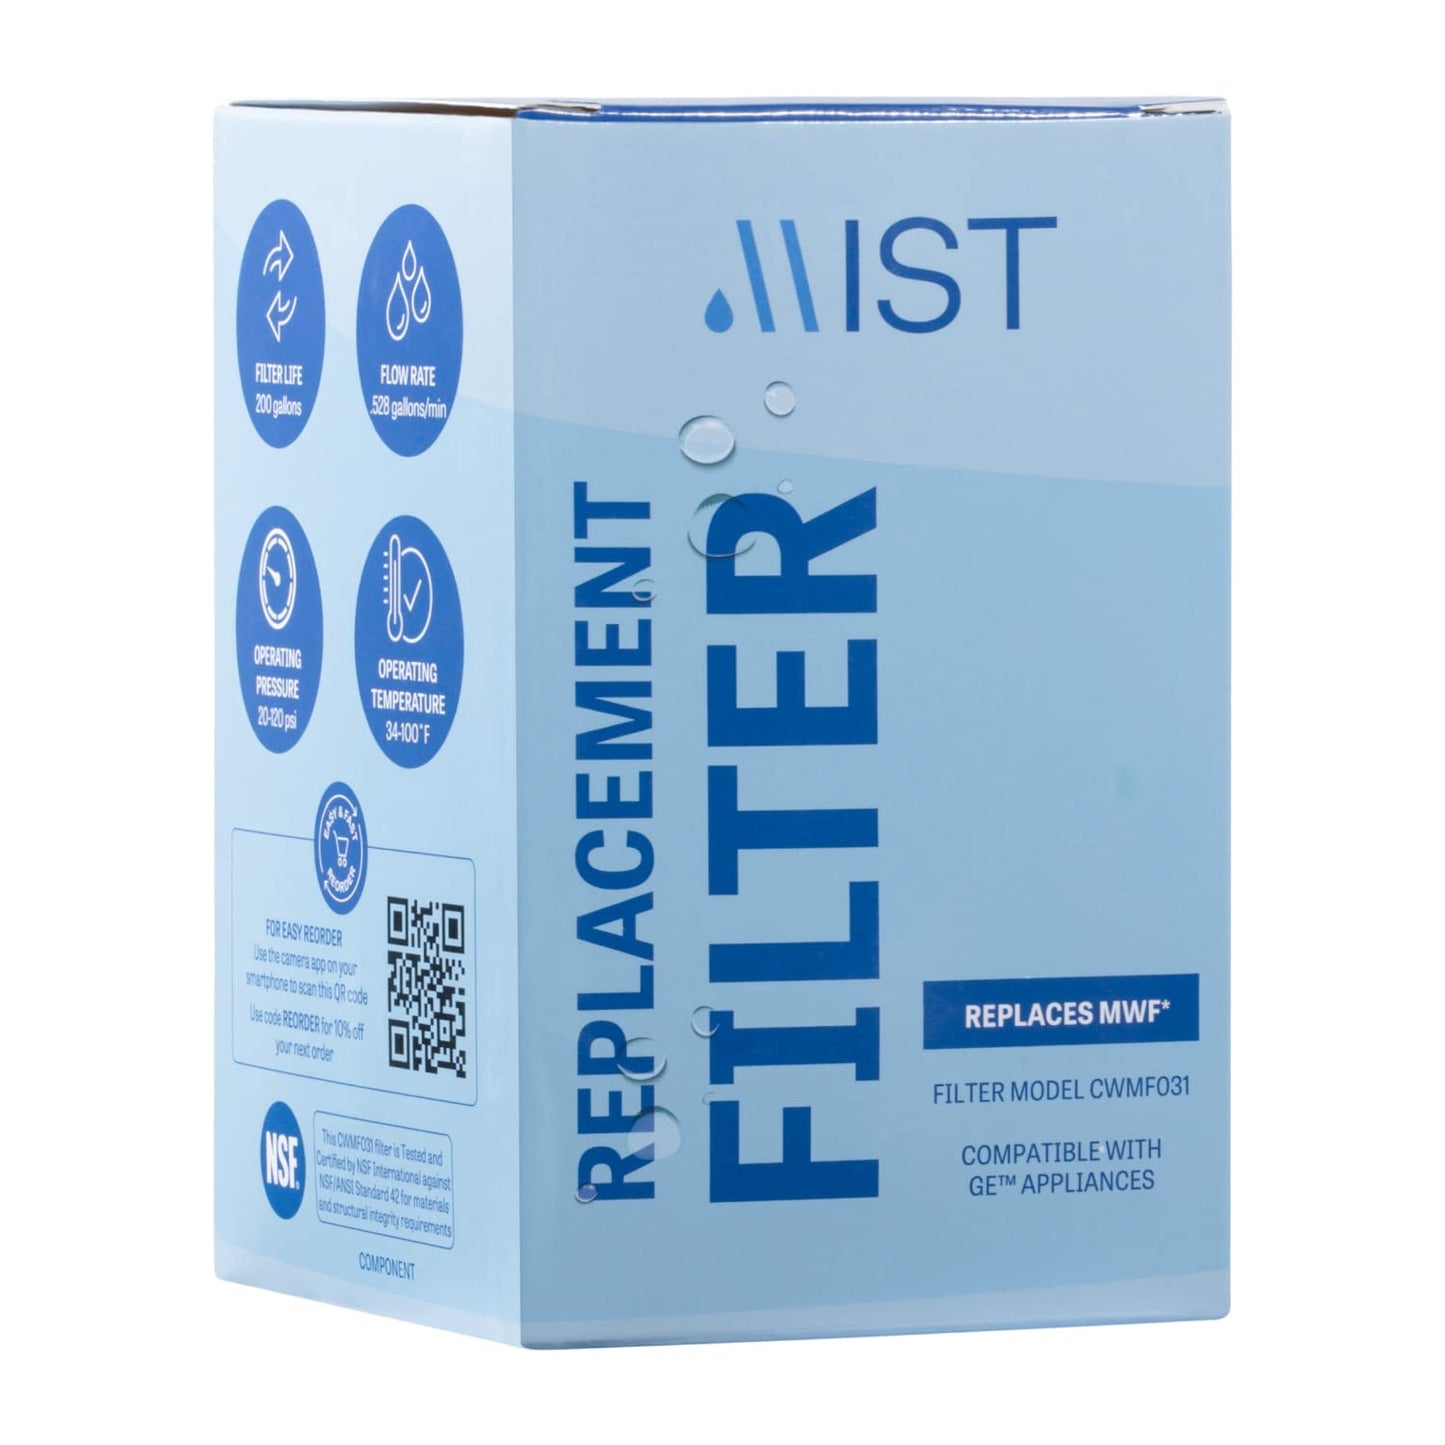 MIST MWF Water Filter Replacement for GE, Refrigerator Water Filter compatible with MWFP, MWFA, GWF, HWF, Smart Water, WFC1201, Kenmore 9991, 469991, WFC1201, GSE25GSHECSS, GE Water Filter (1 pack)